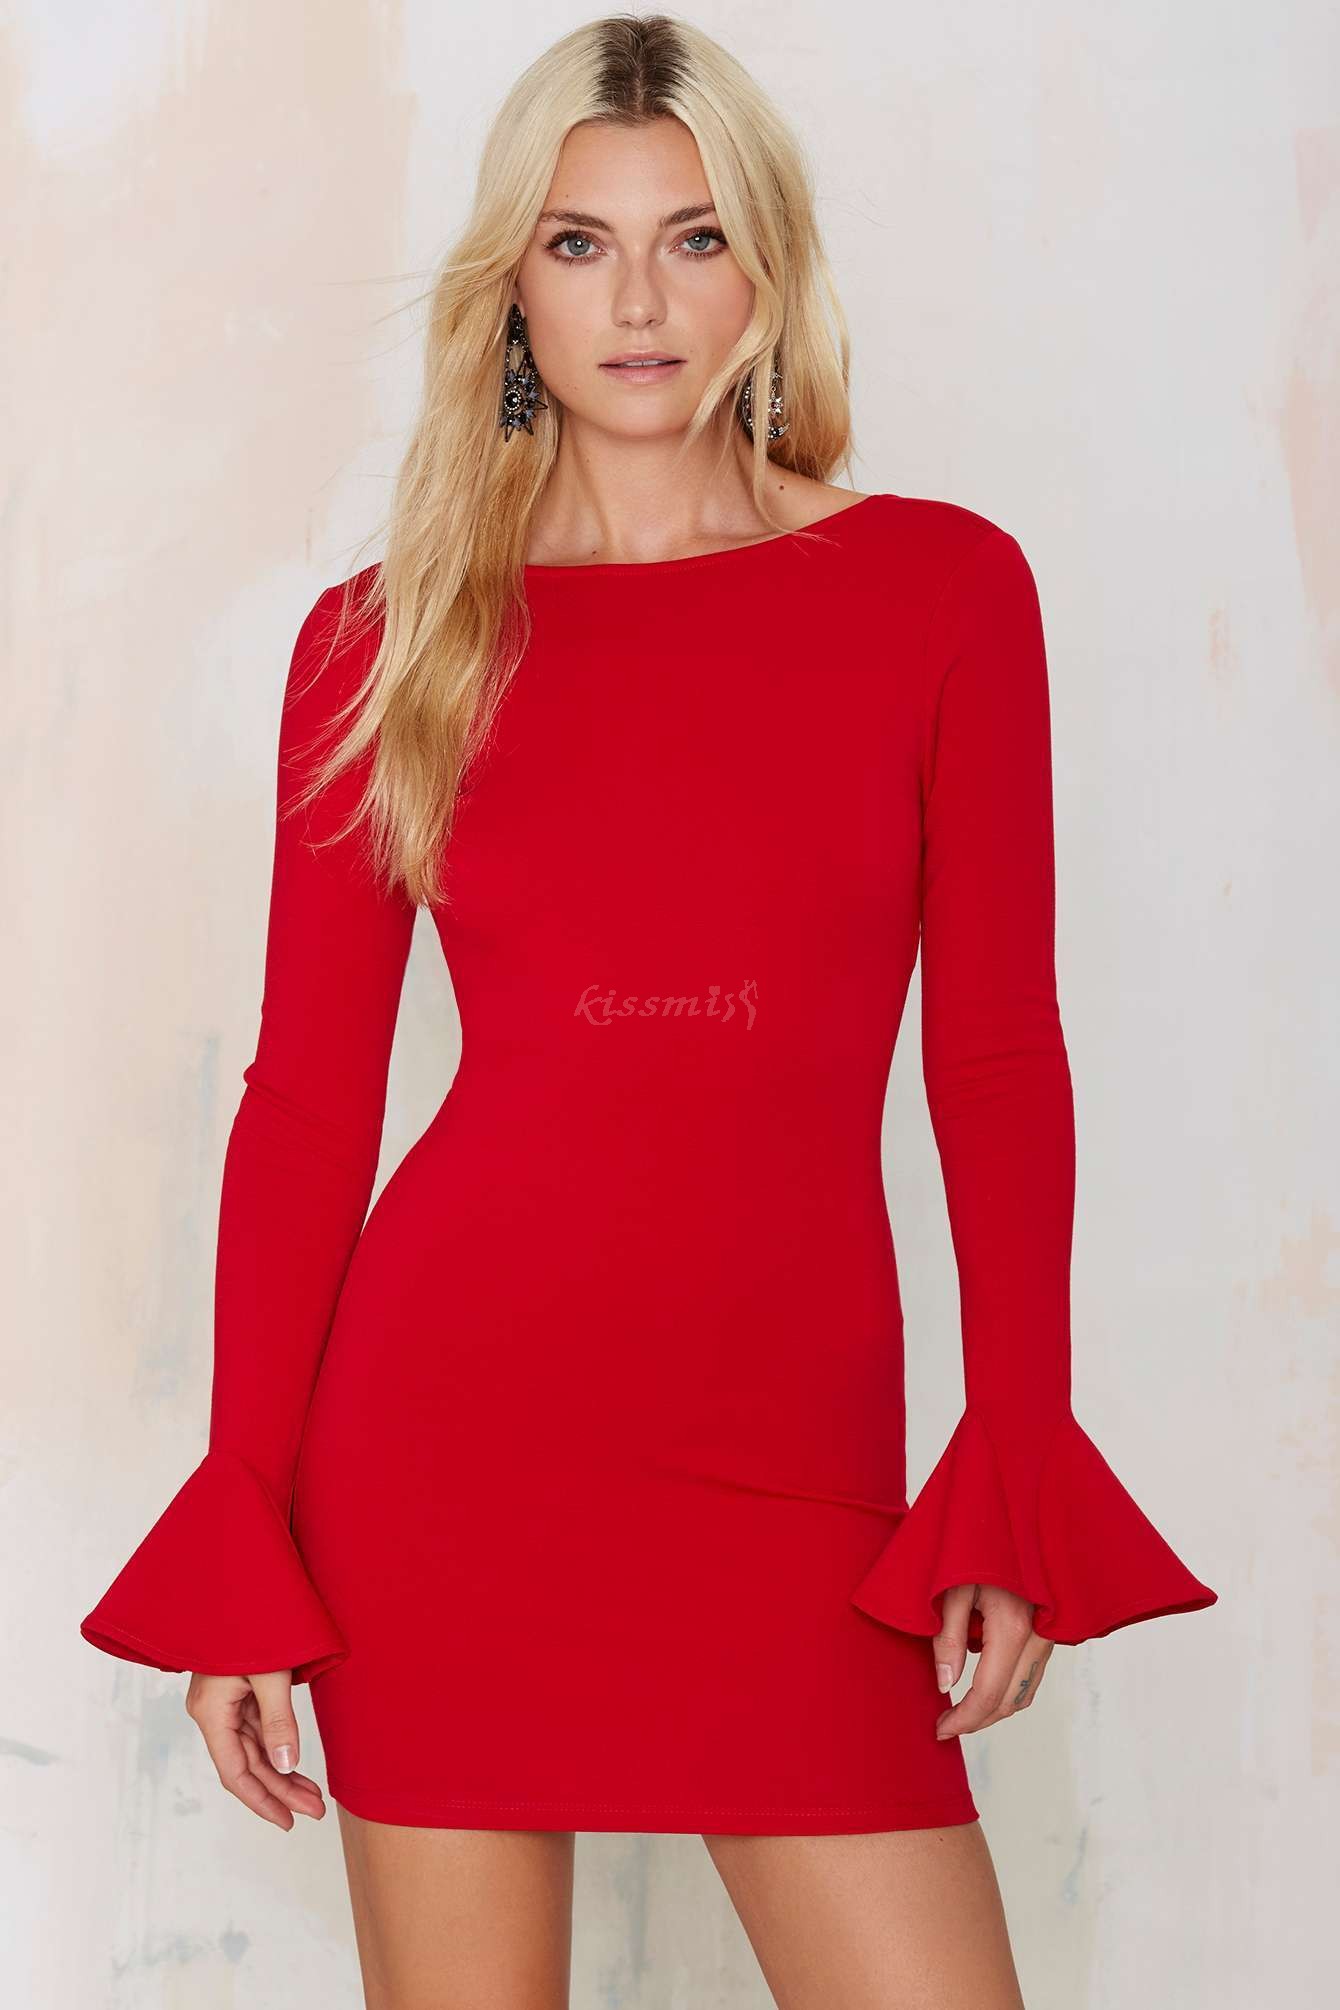 Bell Sleeve Red Dress : Clothing Brand Reviews